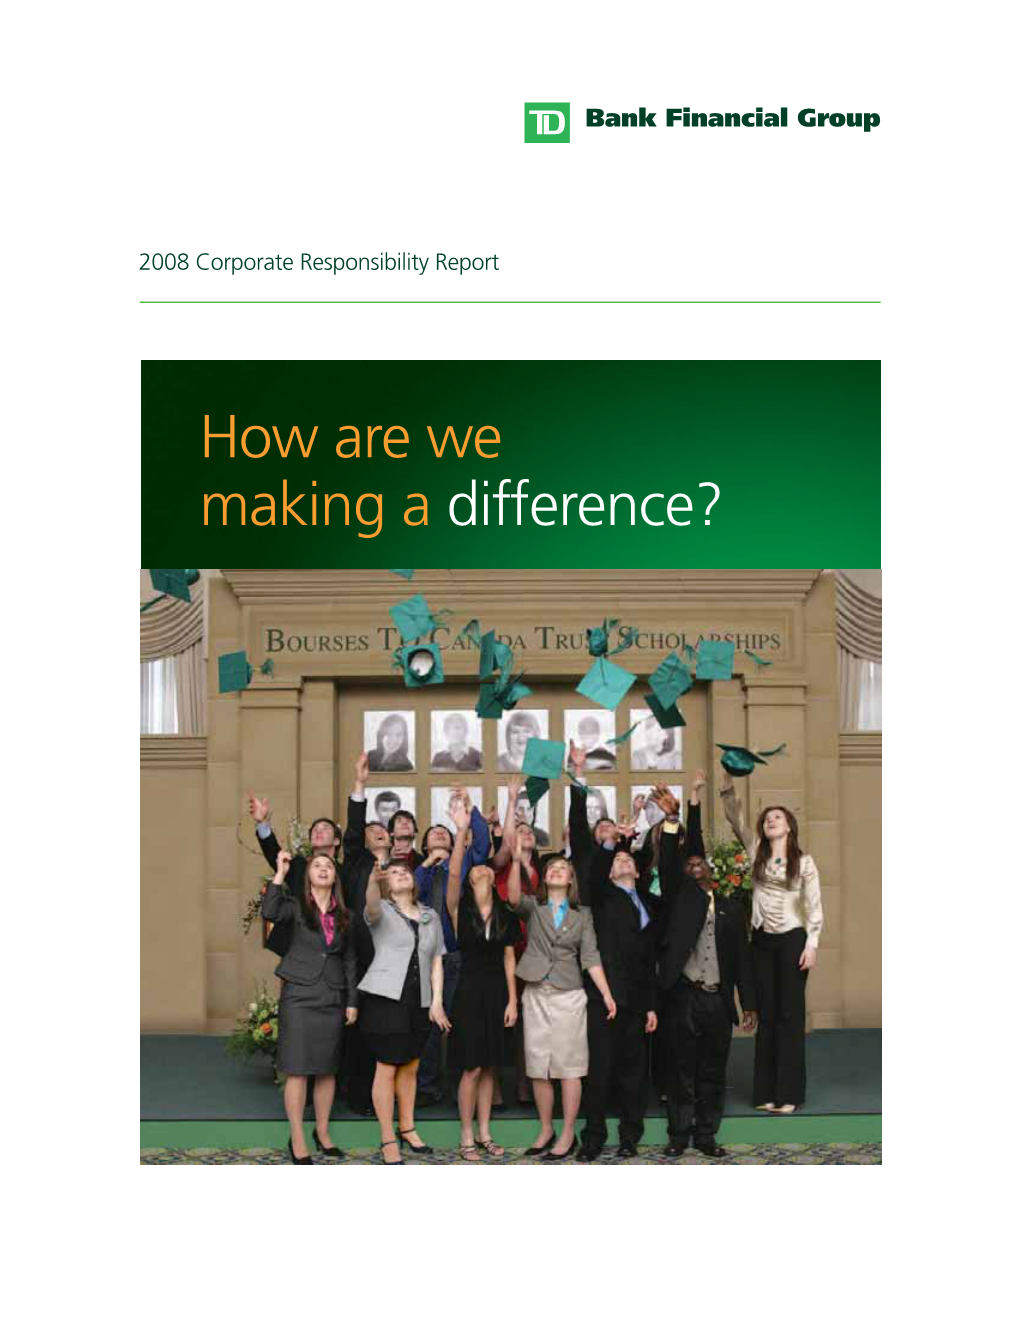 How Are We Making a Difference? TD Bank Financial Group - Corporate Responsibility Report 2008 Corporate Responsibility